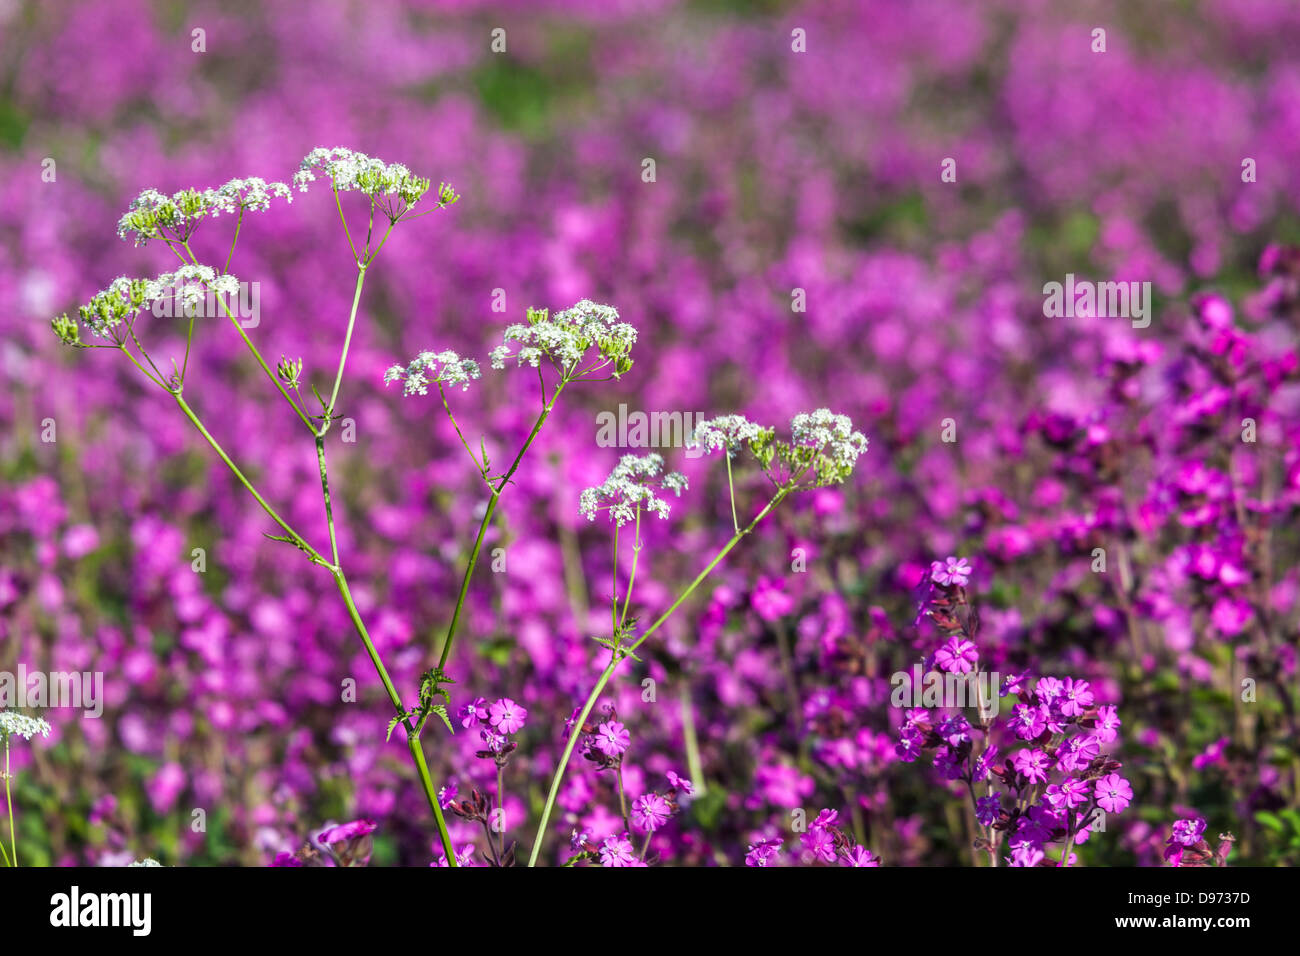 Cow parsley (Anthriscus sylvestris) on the edge of a field of Red Campion (Silene dioica) in the Cotswolds. Stock Photo